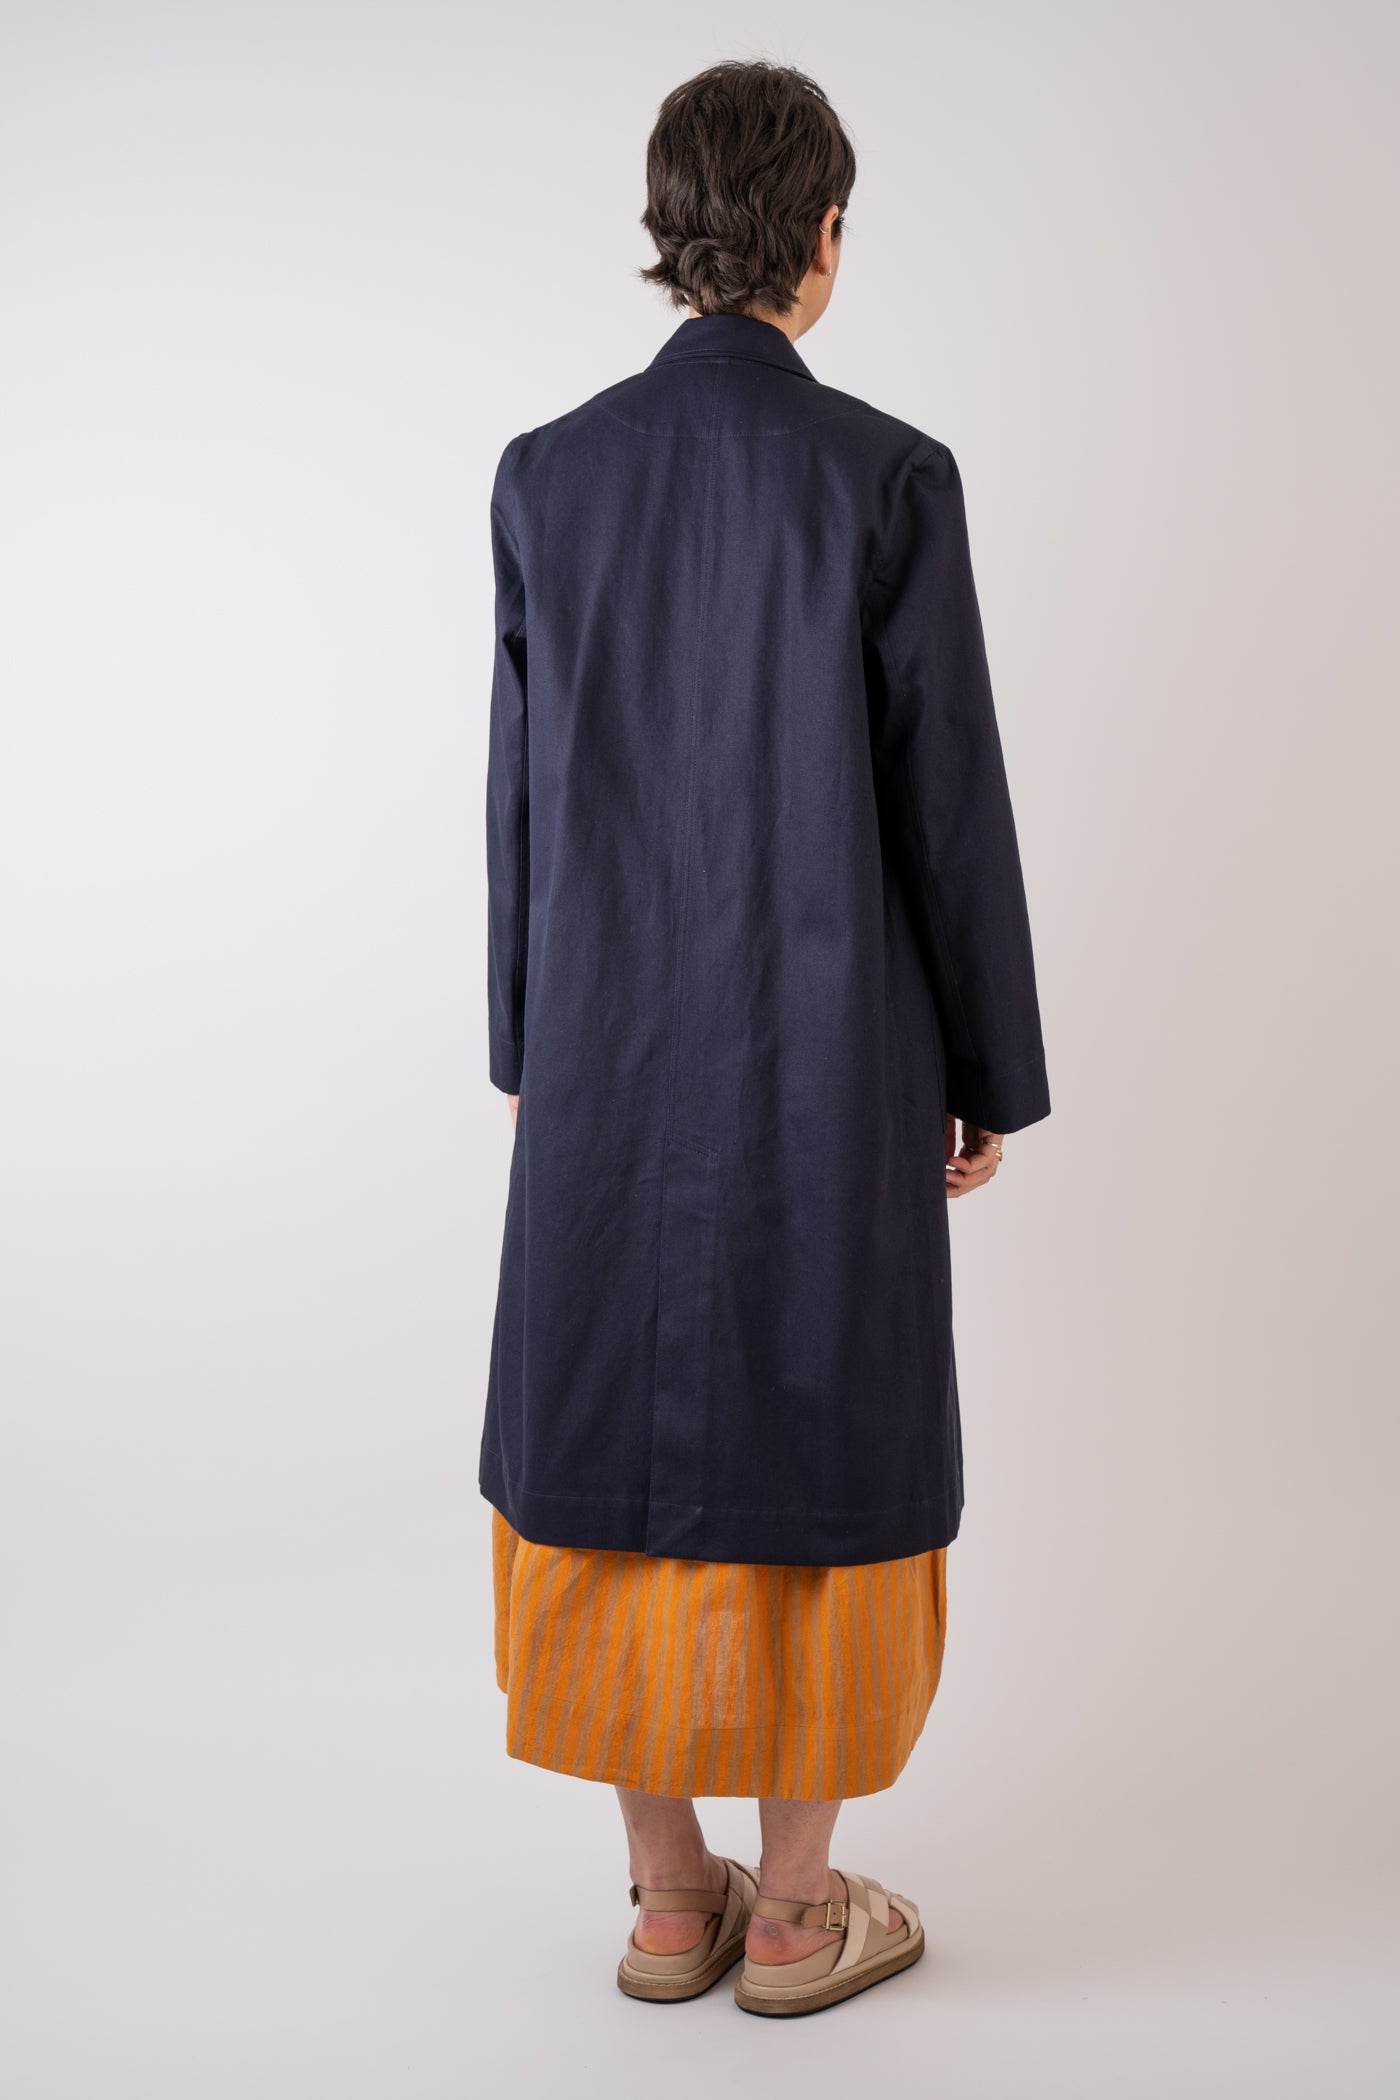 Xi Atelier Organic Cotton Drill Yves Coat in Navy handmade in Glasglow